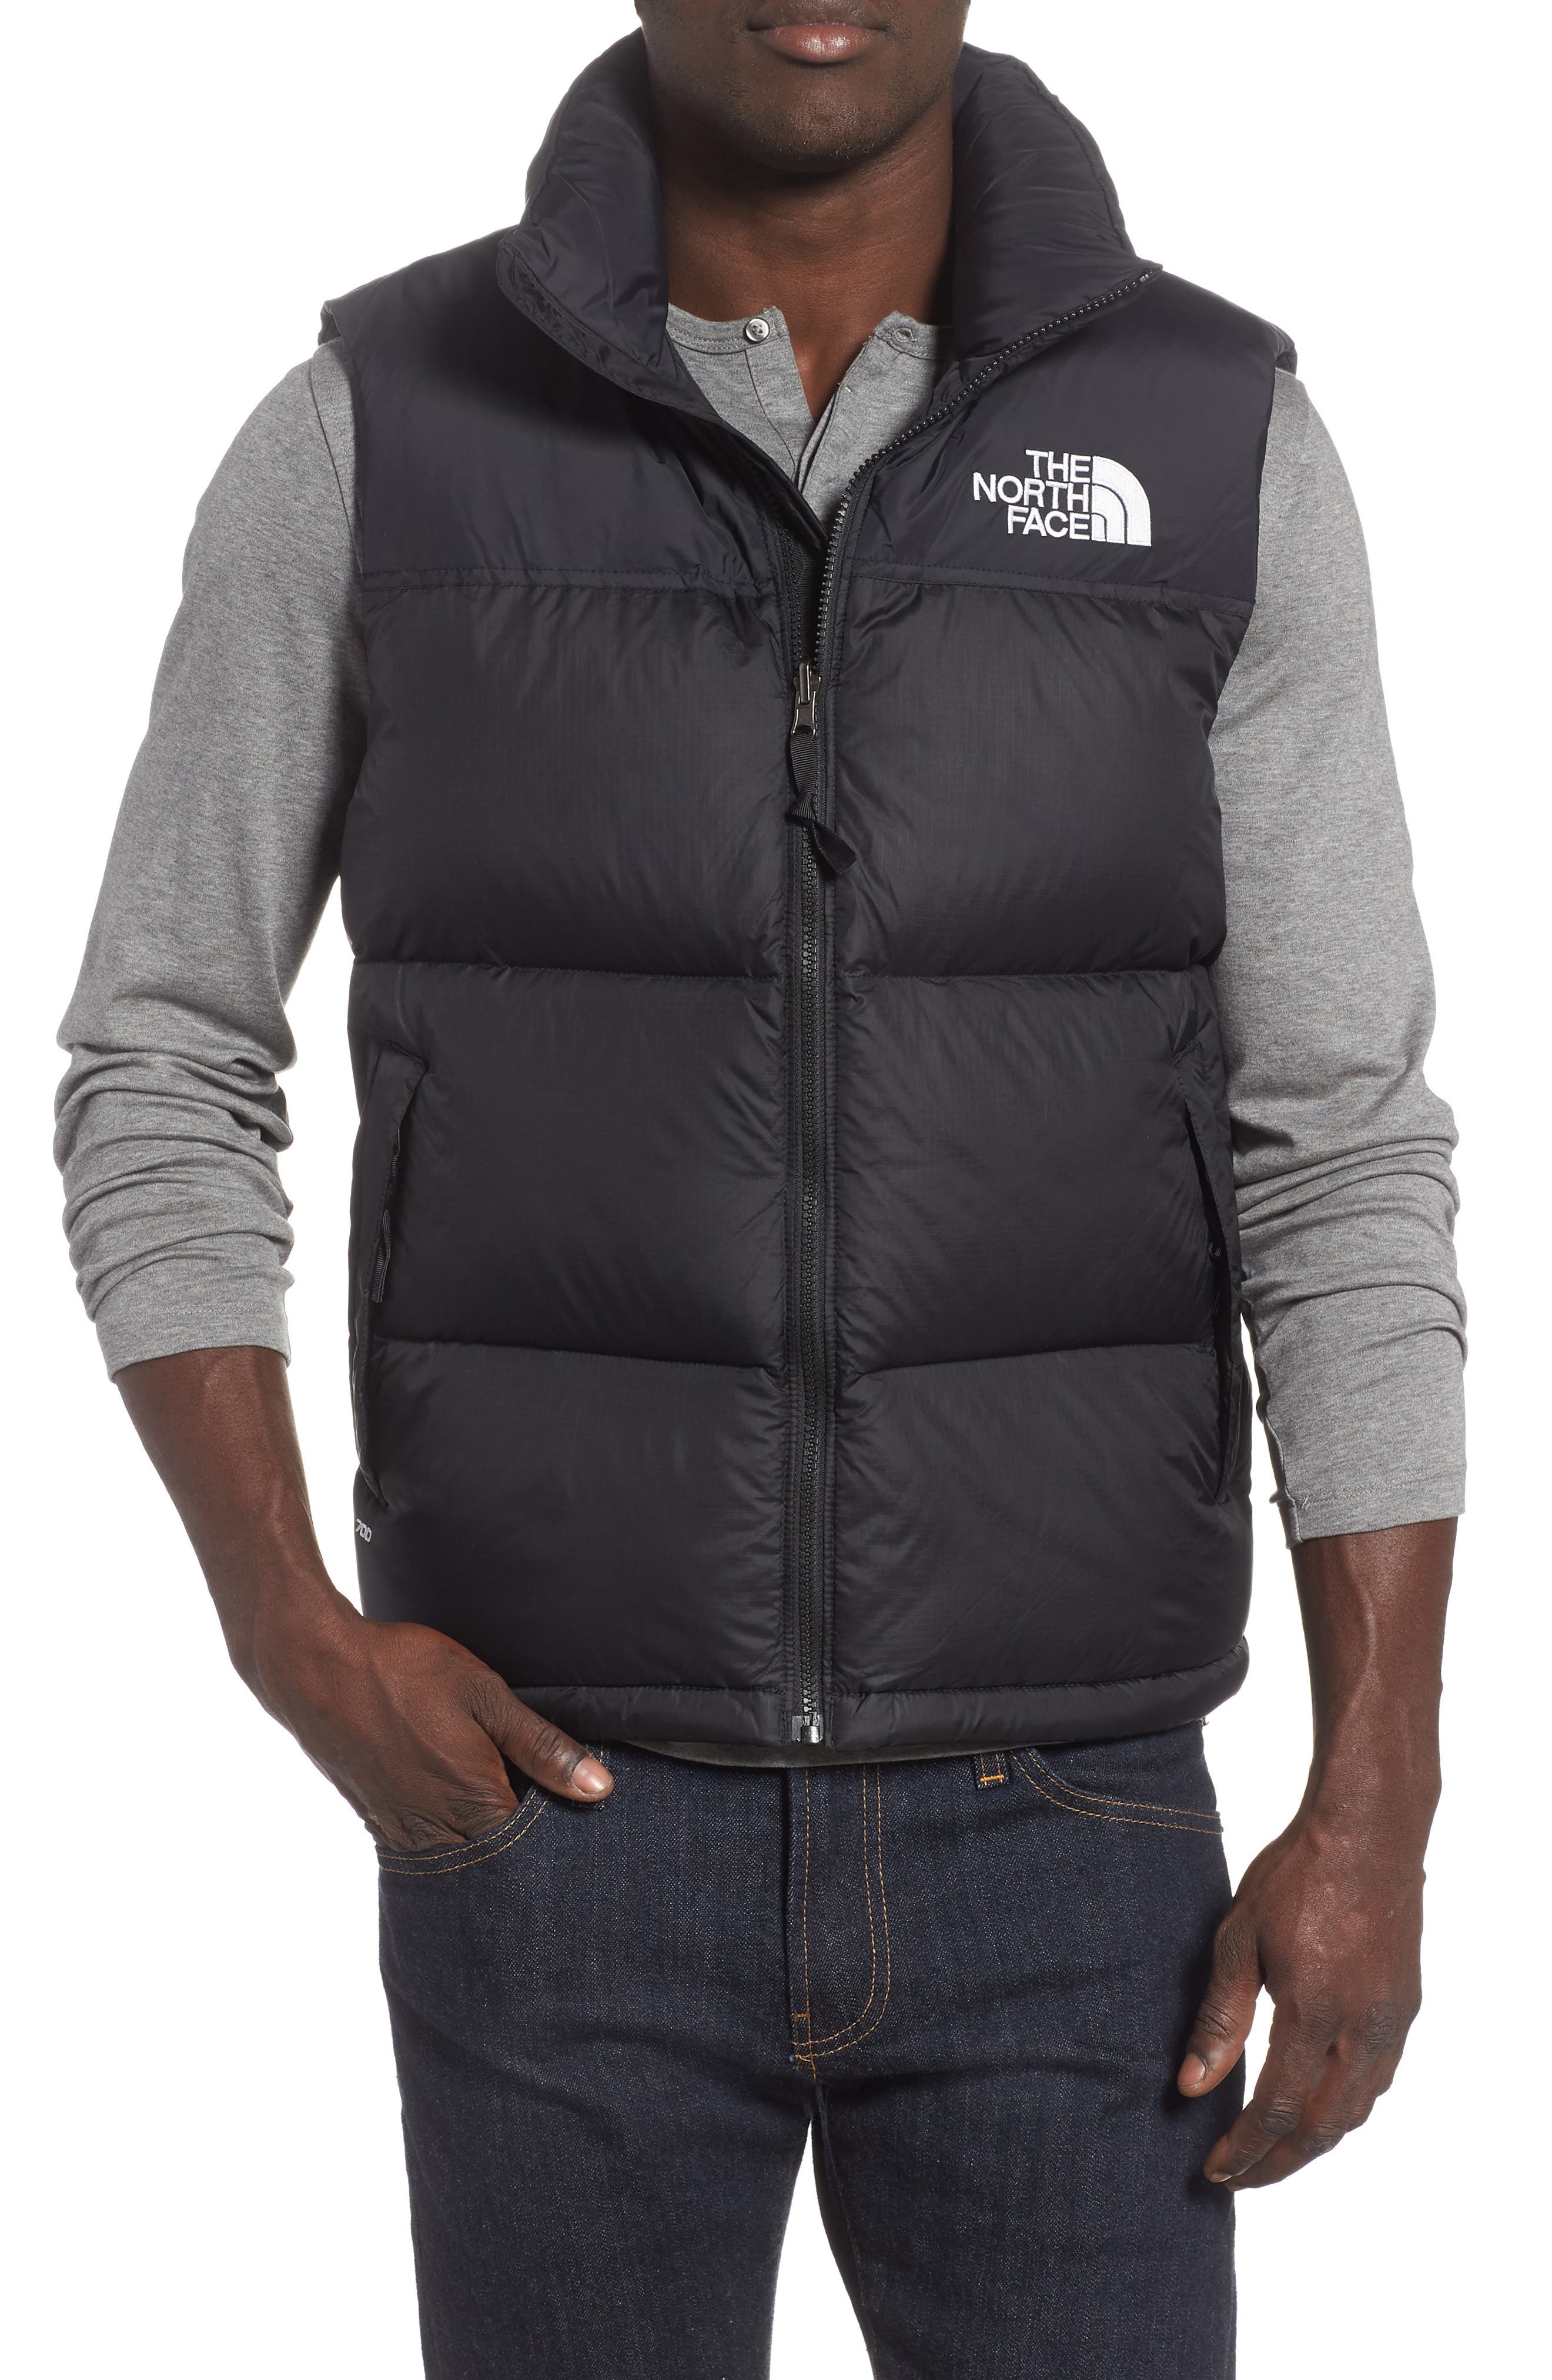 the north face down vest